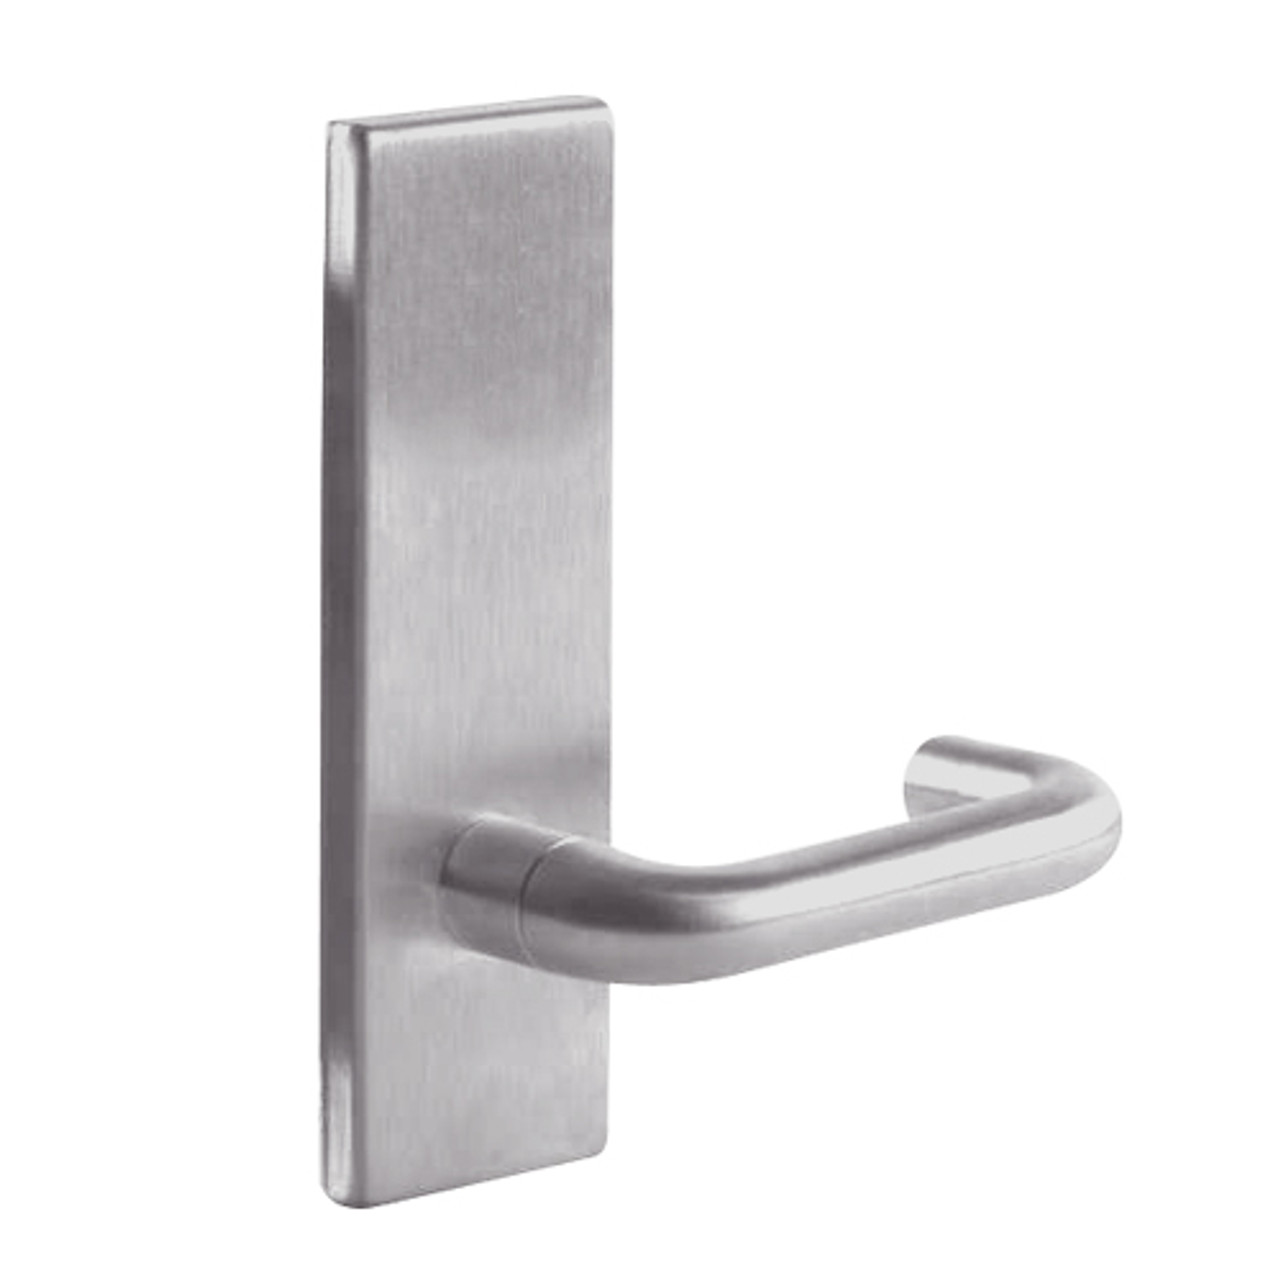 L9010-03N-630 Schlage L Series Passage Latch Commercial Mortise Lock with 03 Cast Lever Design in Satin Stainless Steel